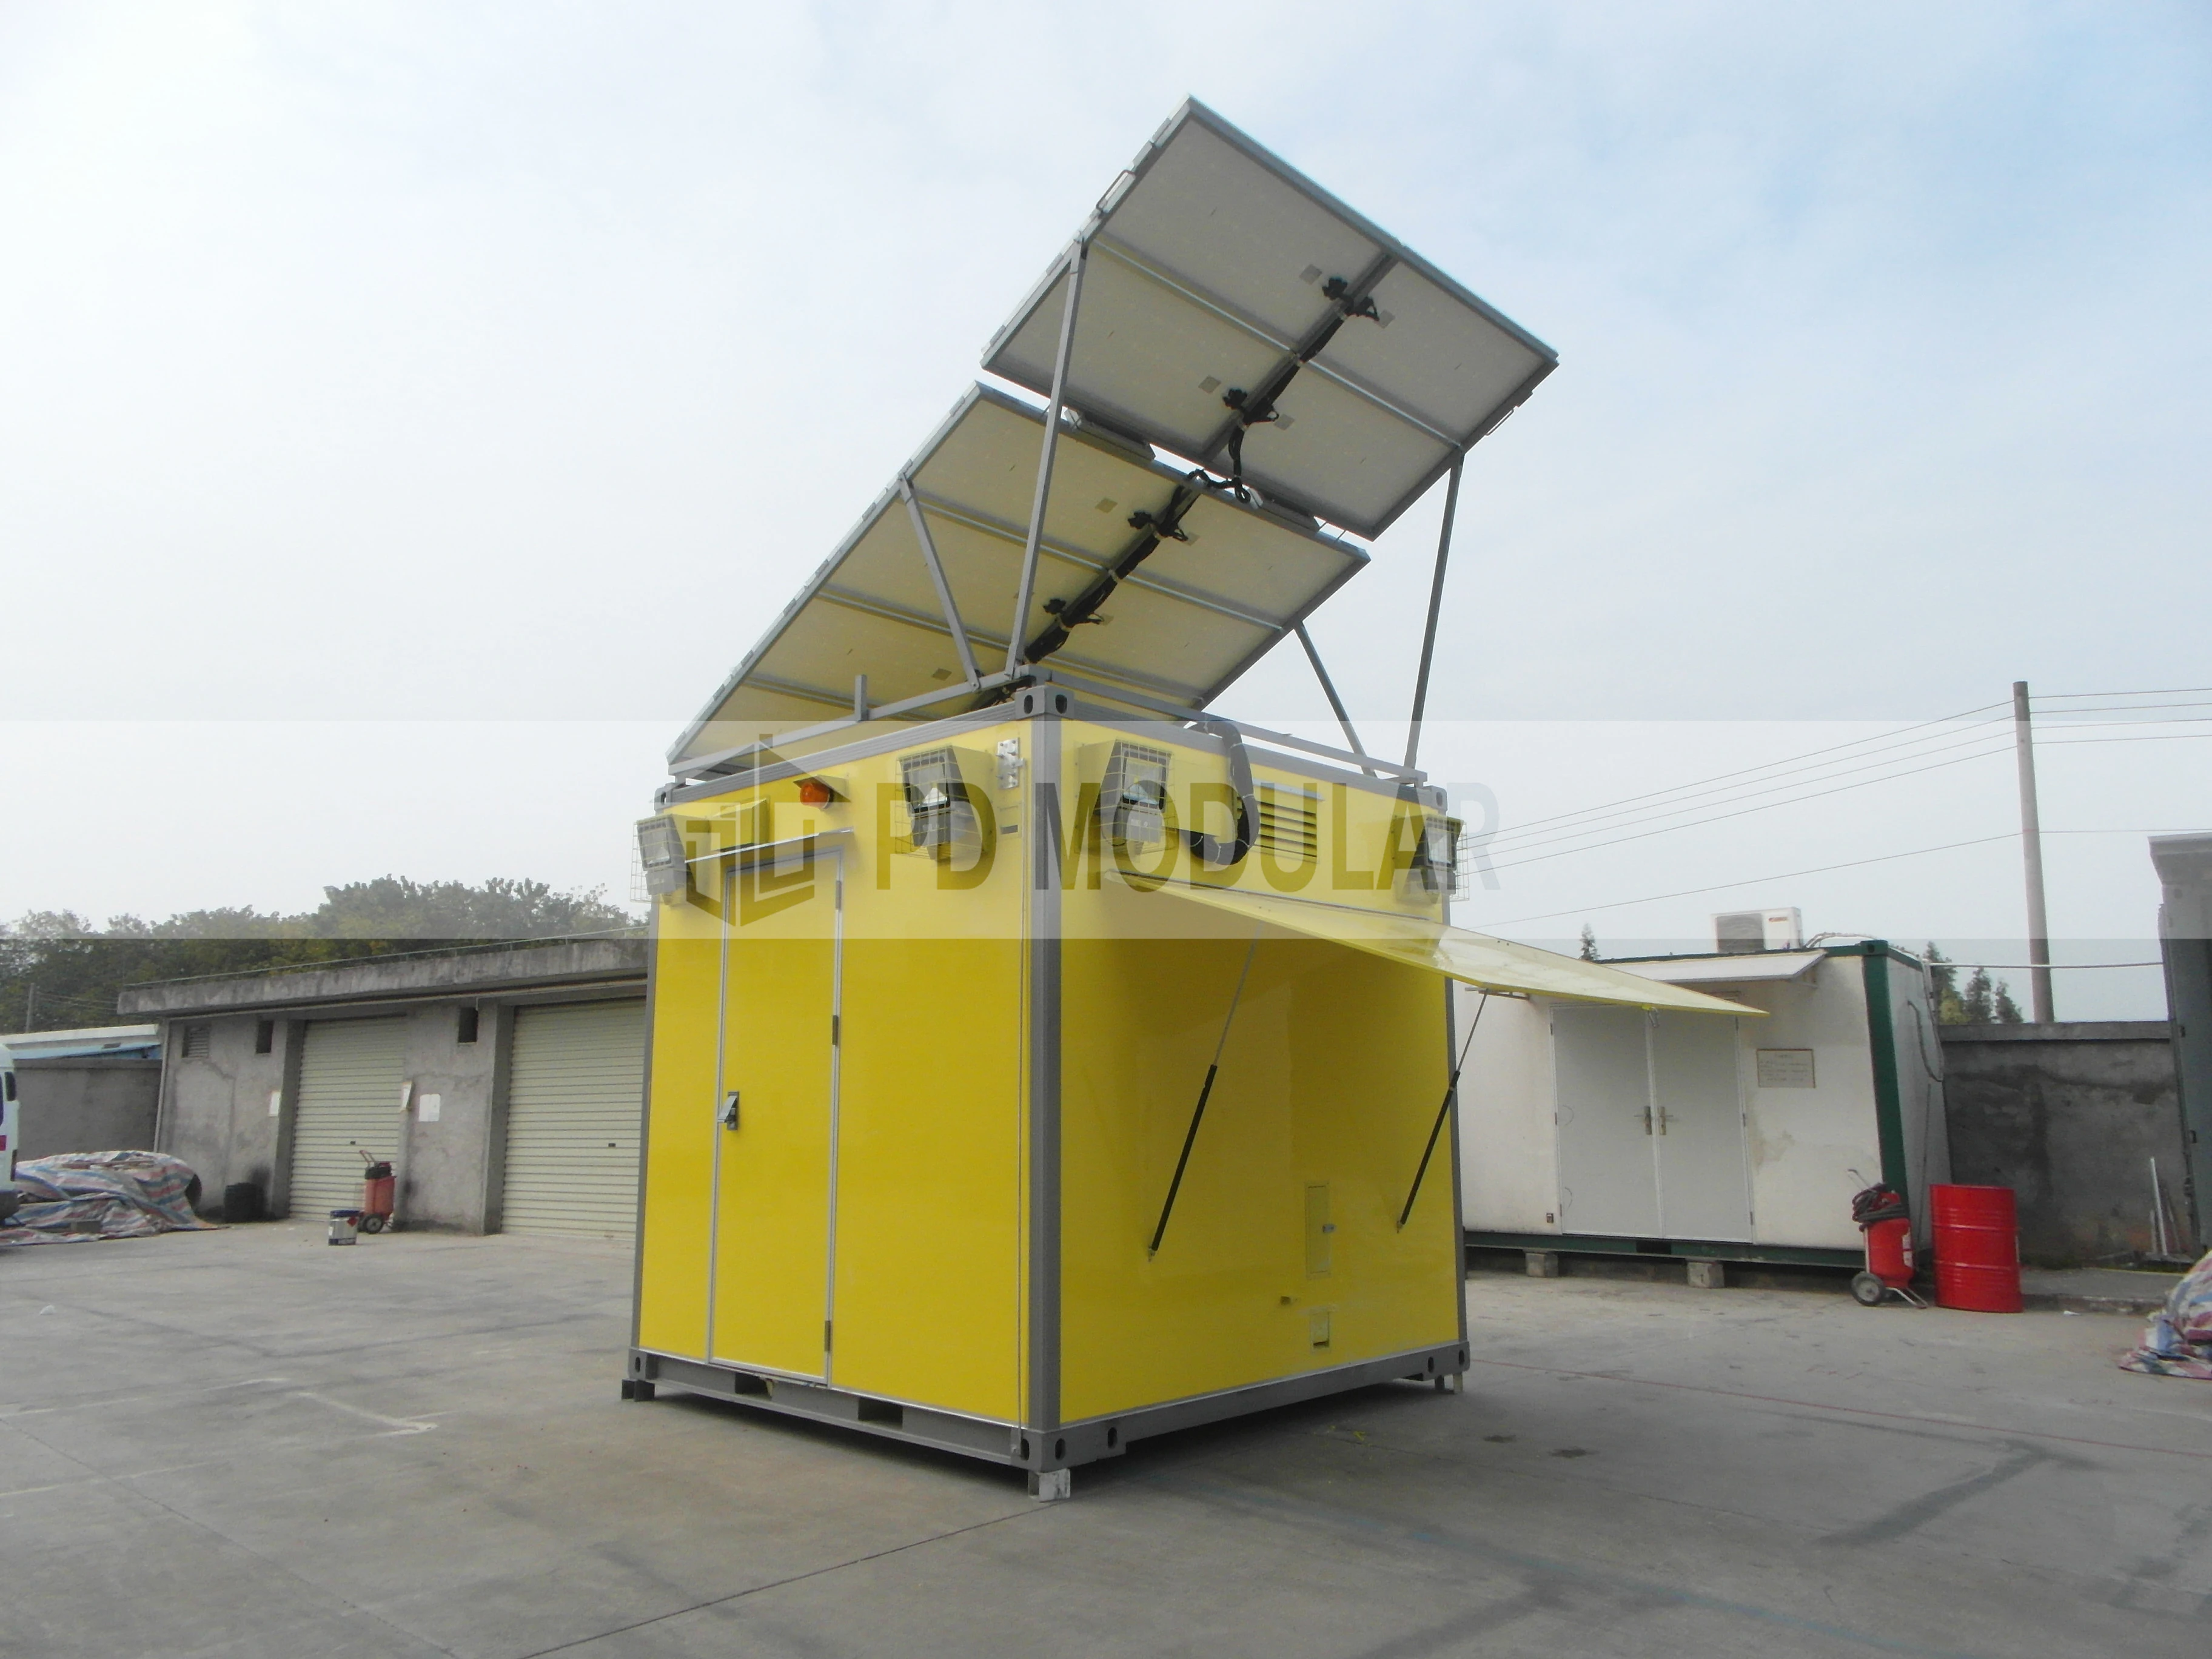 Prefabricated mobile modern progressive container airport communications shelters